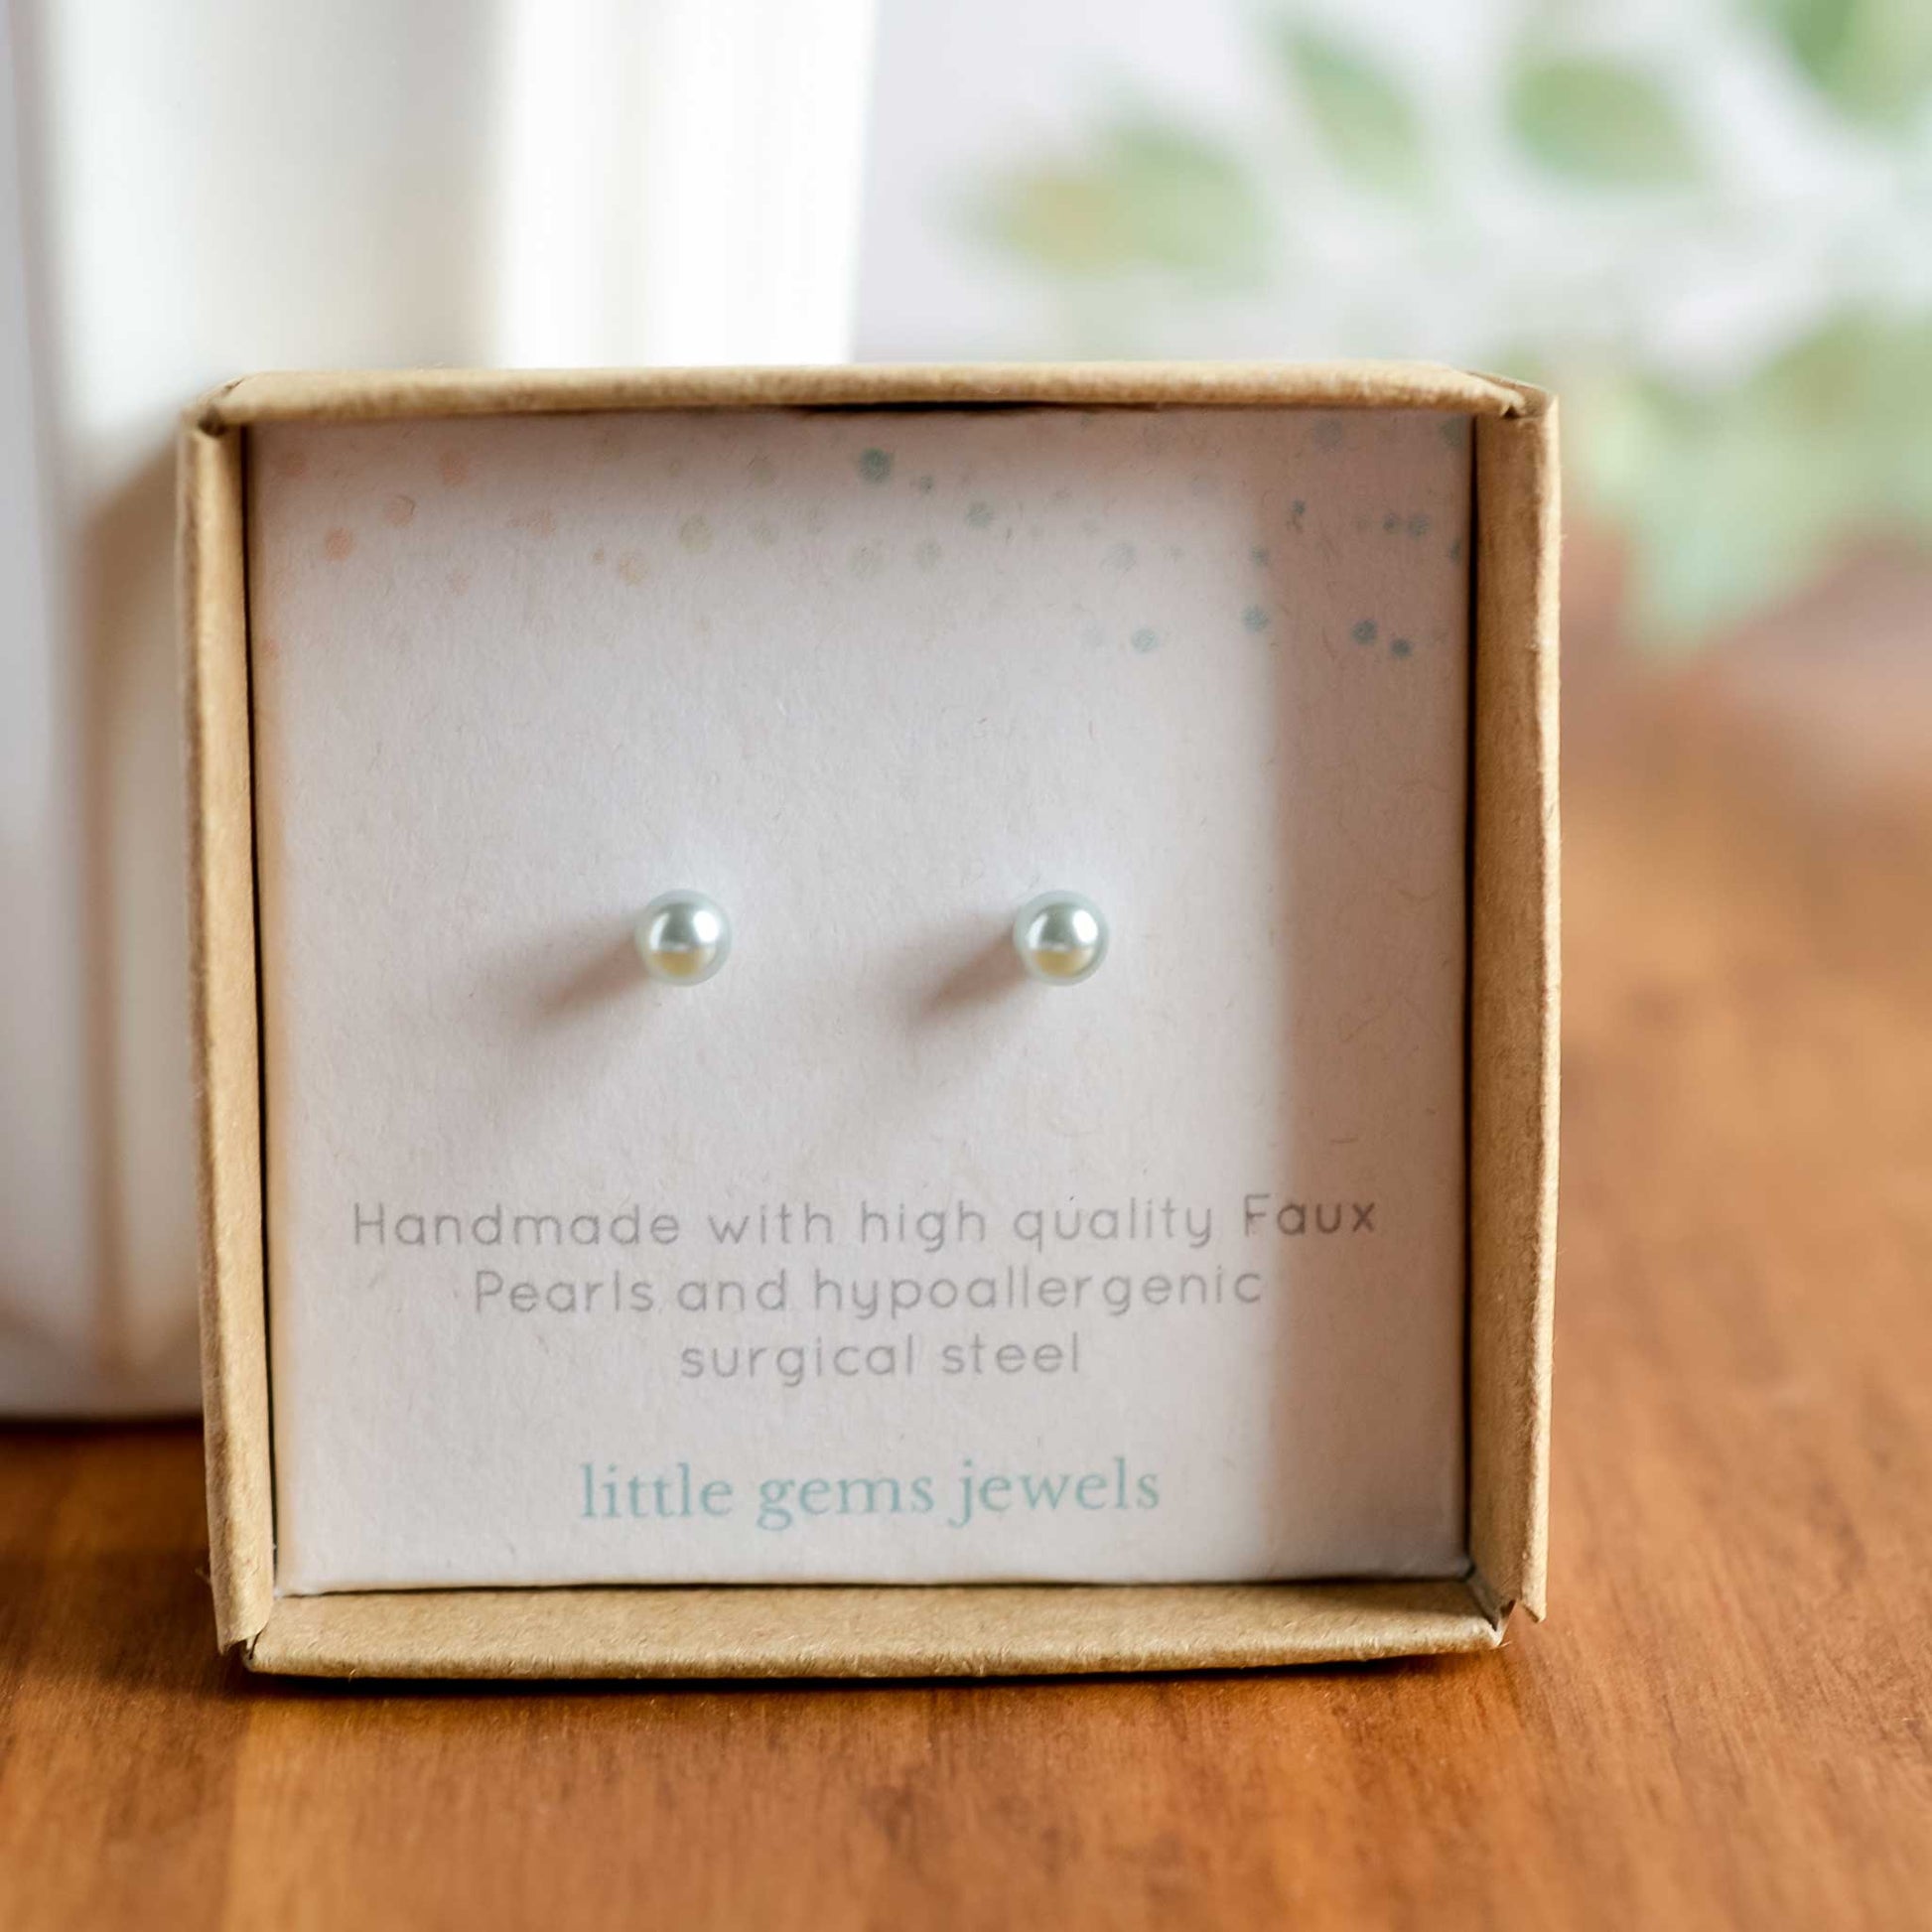 Tiny light blue faux pearl stud earrings in eco friendly gift box